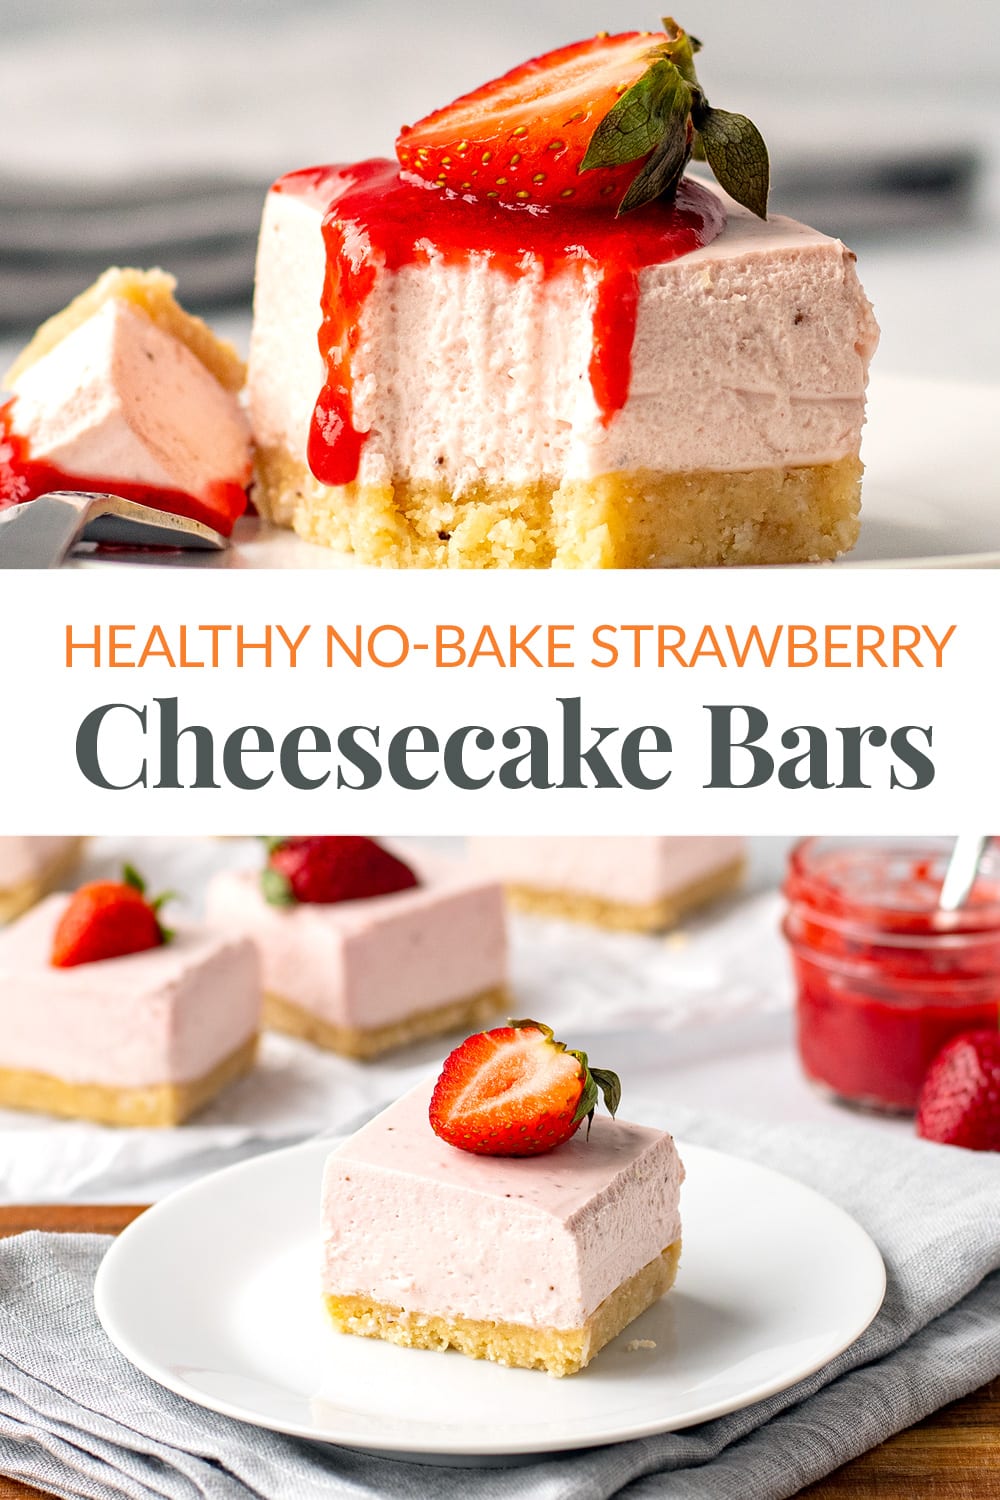 Strawberry Cheesecake Bars (No Bake, Low-Carb, Gluten-Free)